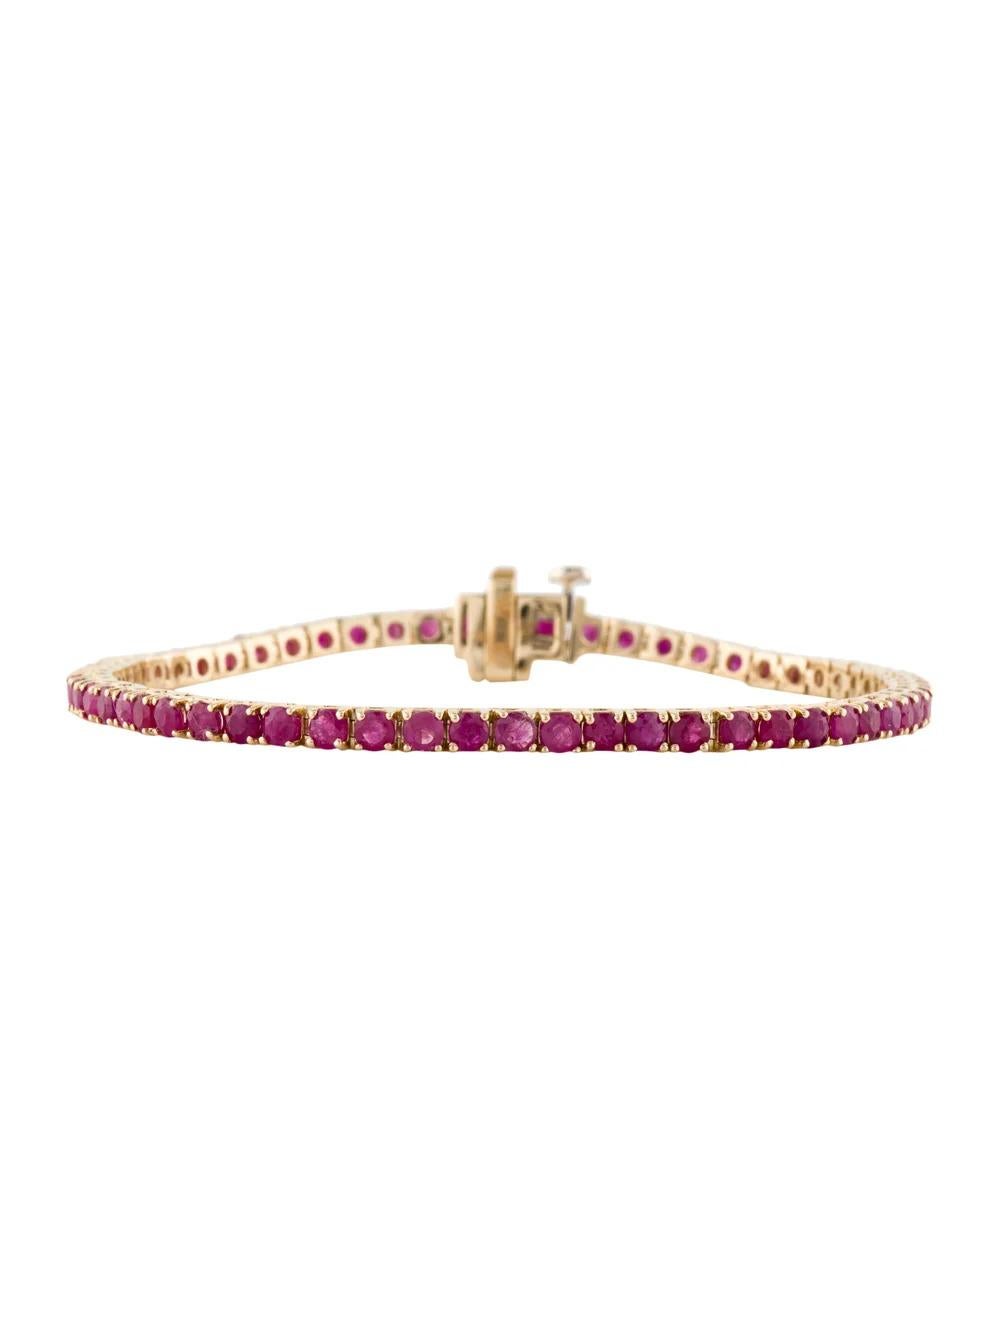 Elevate your wrist with this stunning 14K Yellow Gold Ruby Tennis Bracelet, boasting a remarkable 6.43 Carat Round Modified Brilliant Ruby. Crafted with meticulous attention to detail, this bracelet exudes elegance and